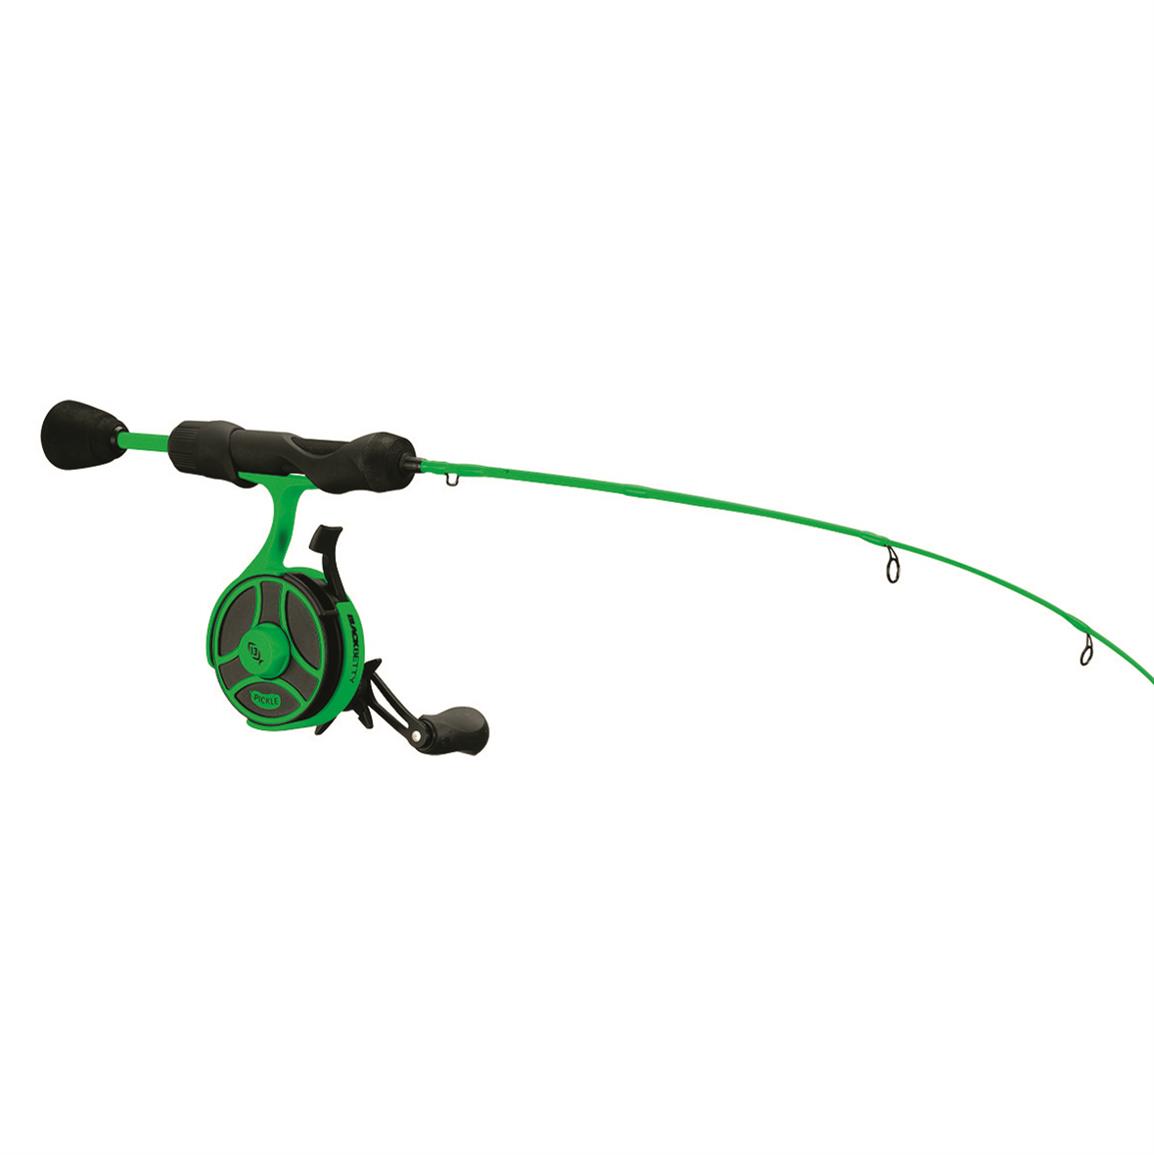 13 Fishing Snitch Pro/FreeFall Ghost Rod and Reel Ice Fishing